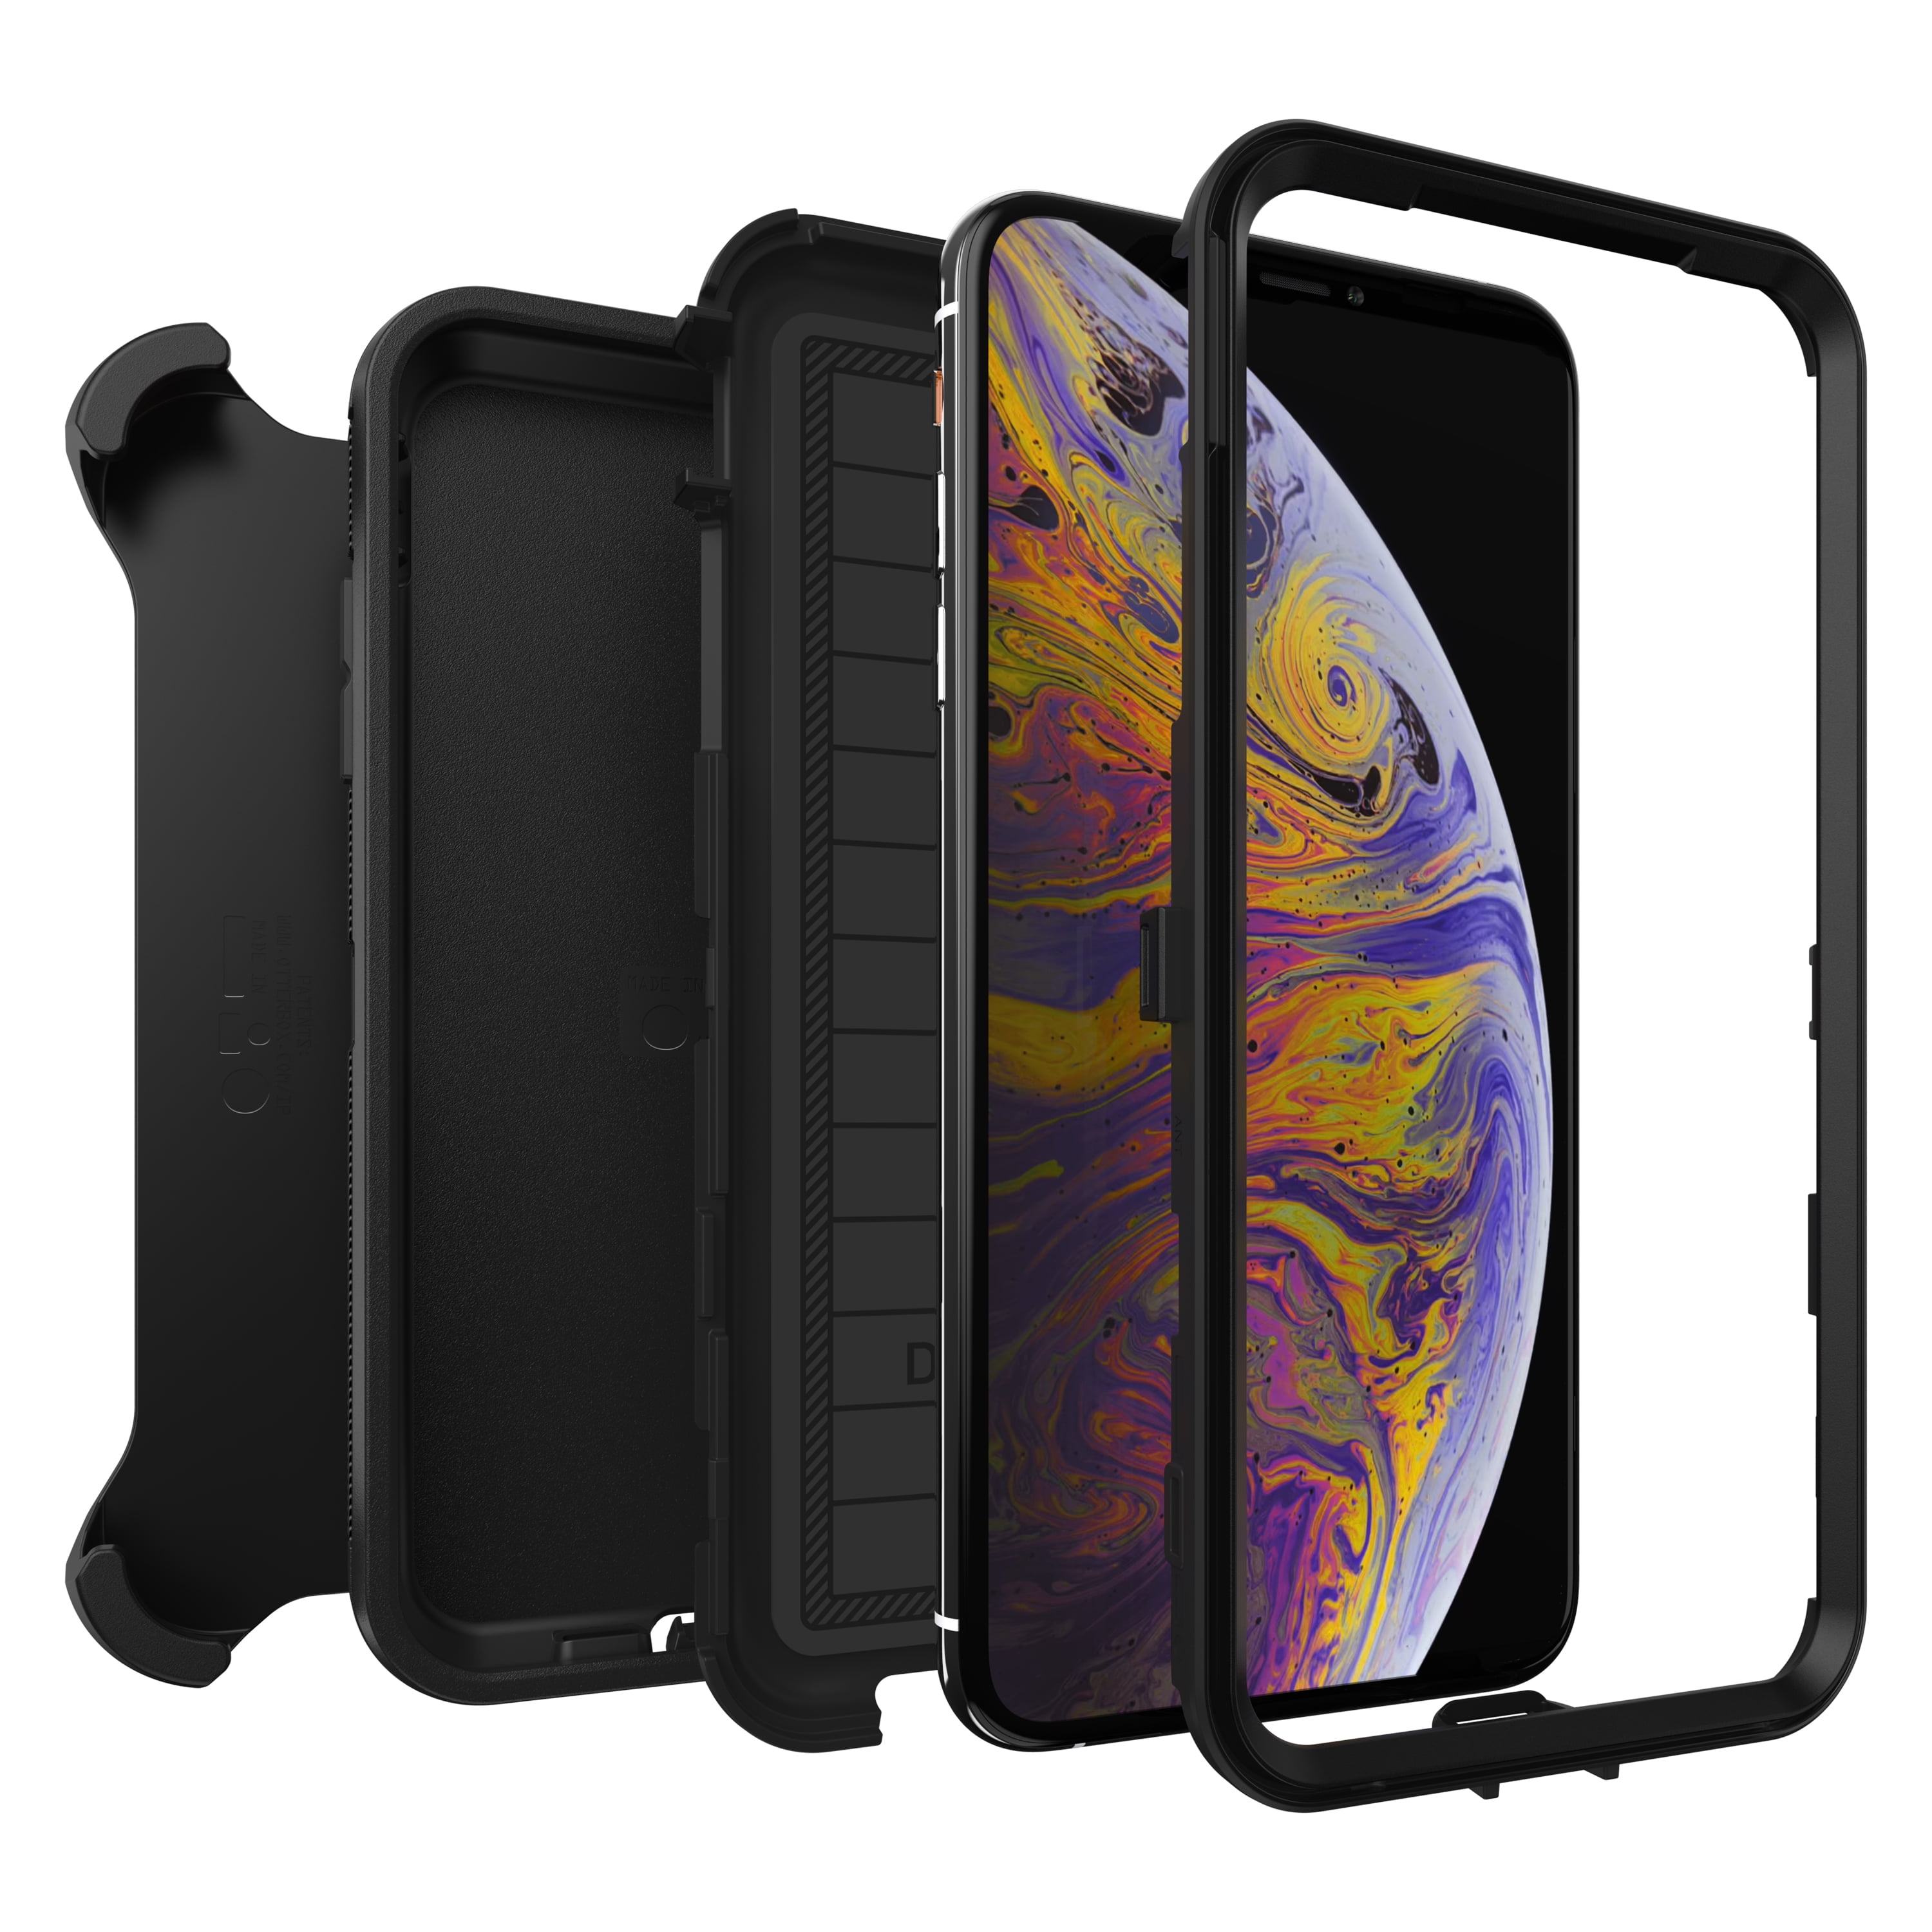 iPhone XS Max Otterbox Defender Screen Protector